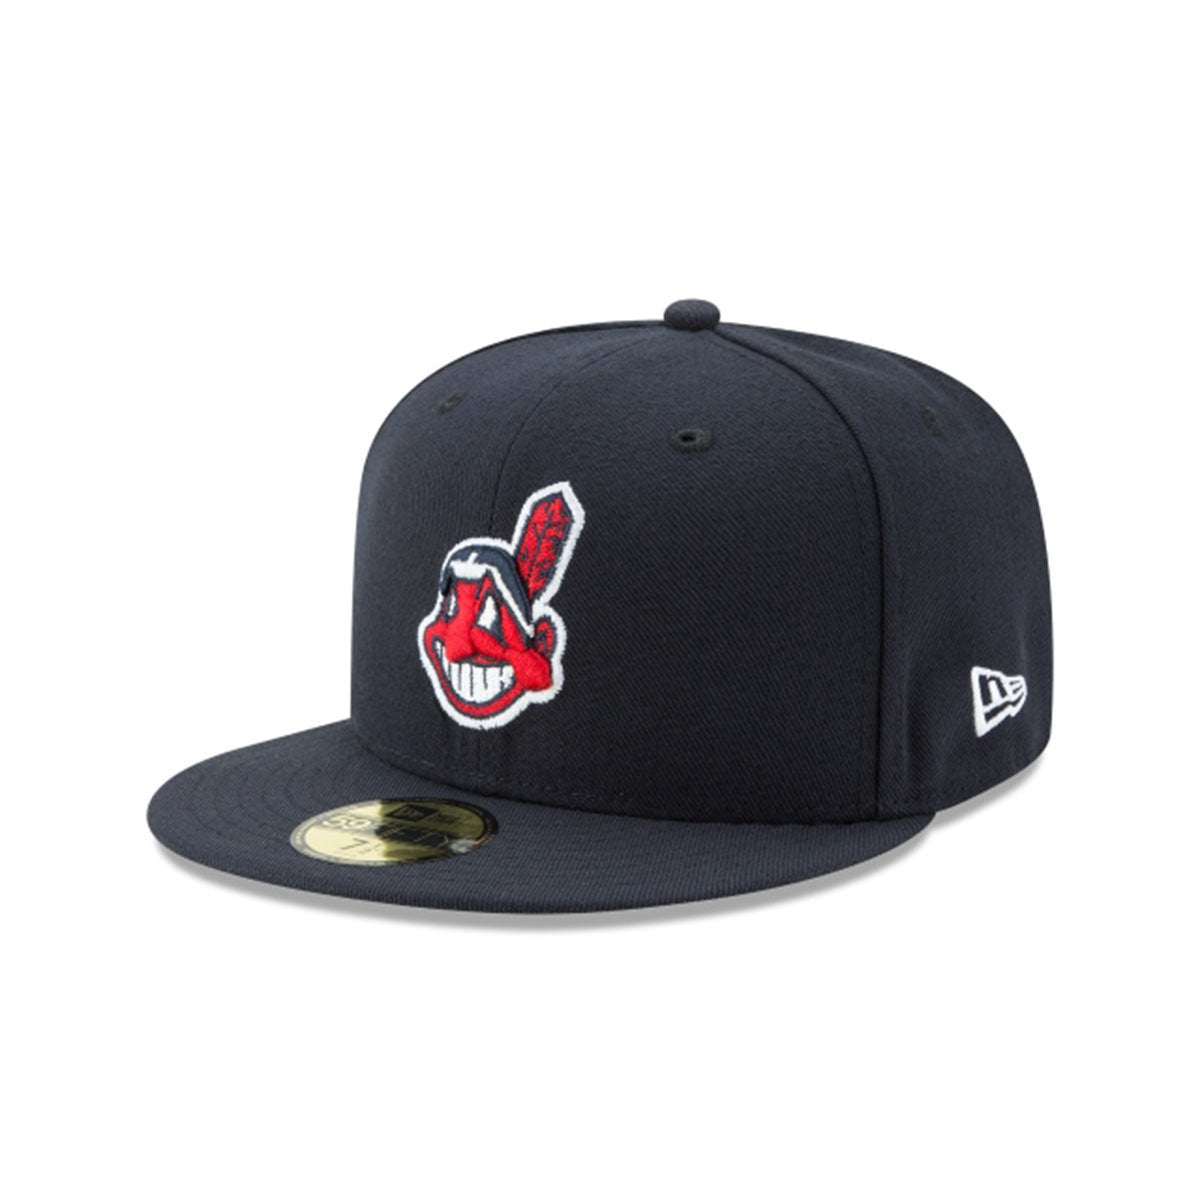 CLEVELAND INDIANS 59FIFTY FITTED BLACK/RED